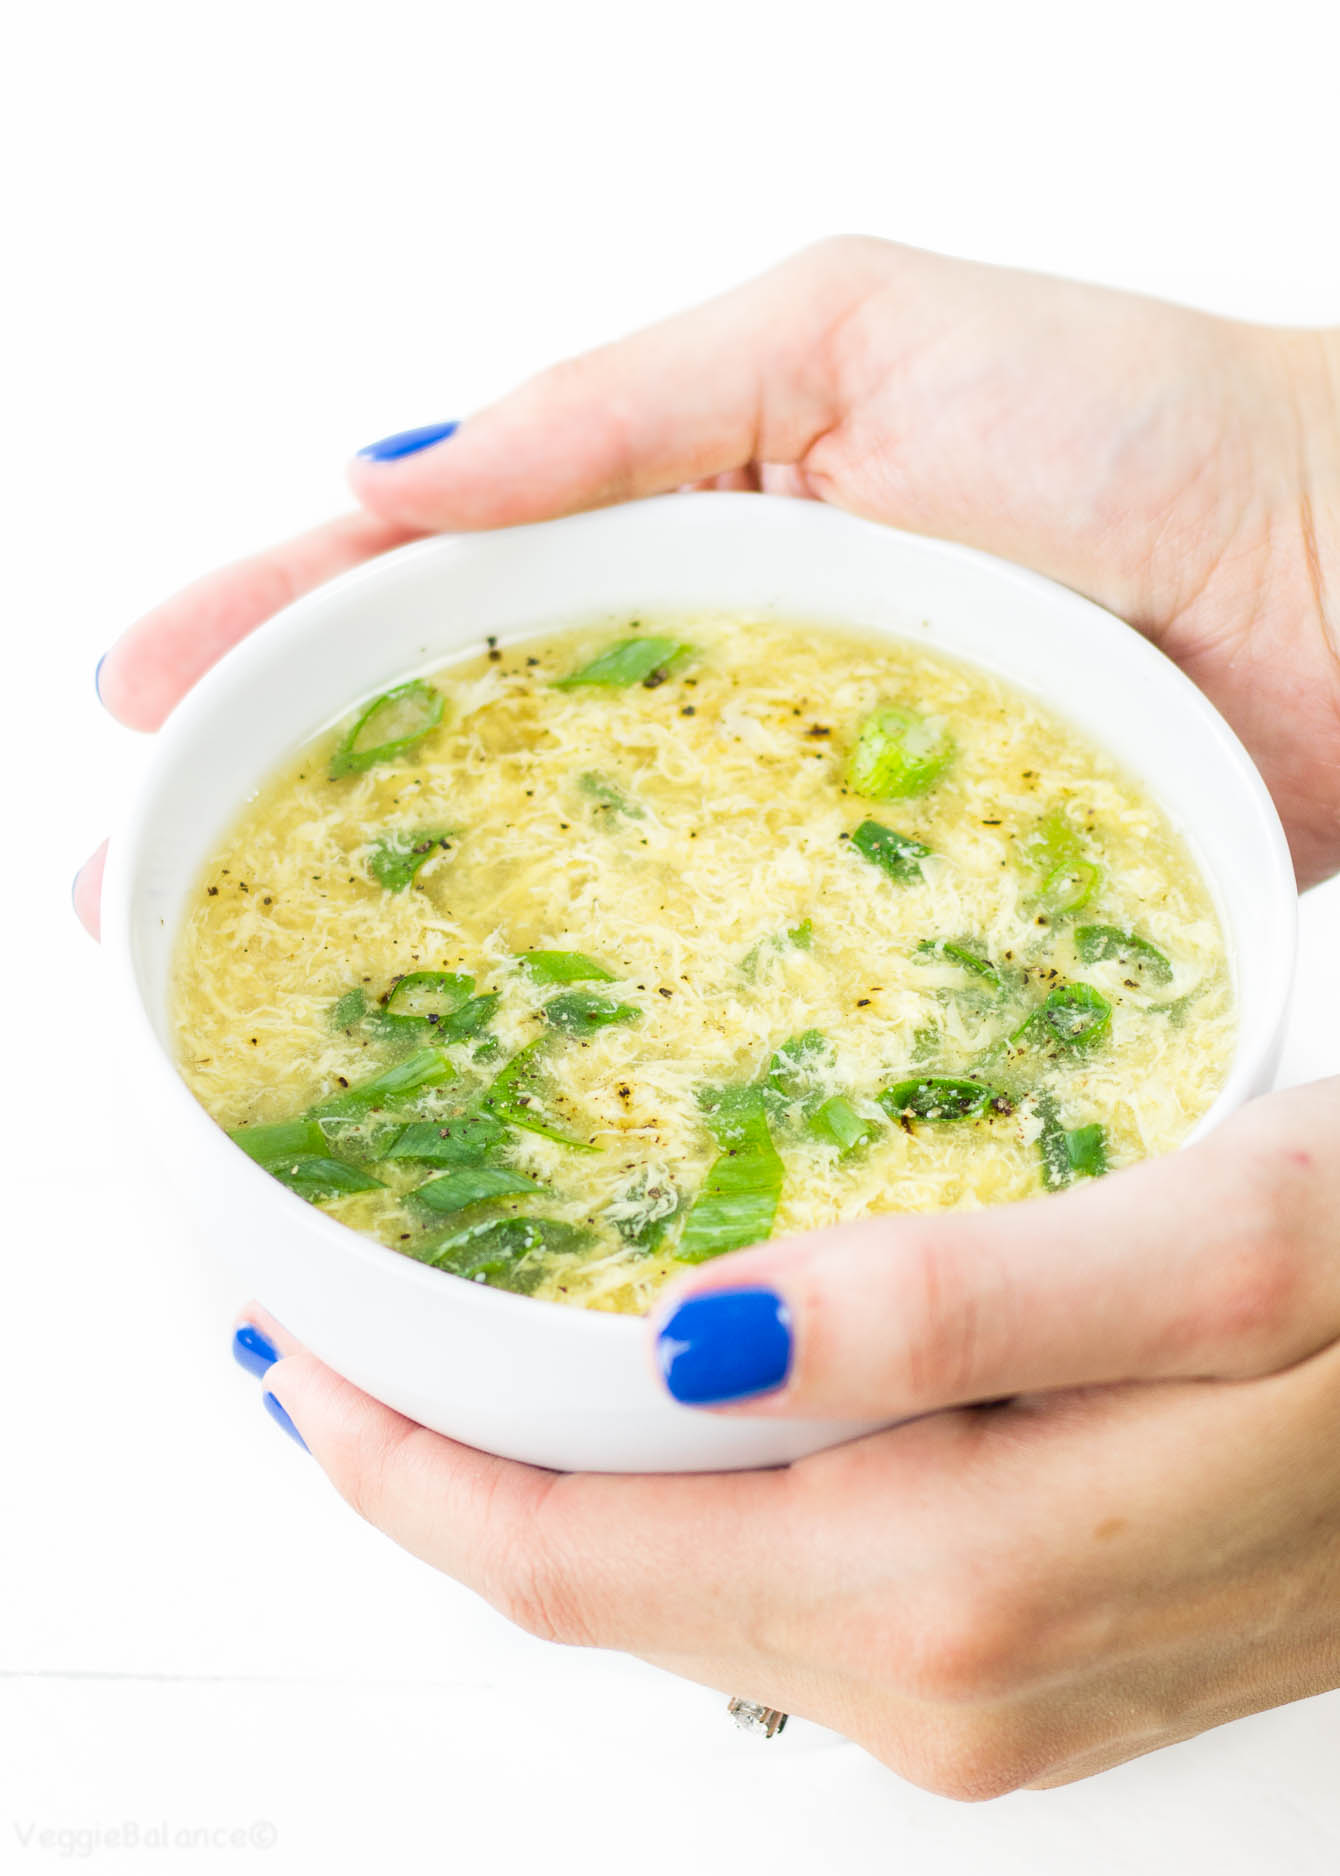 Tasty Egg Drop Soup Made at Home (Gluten Free) Recipe